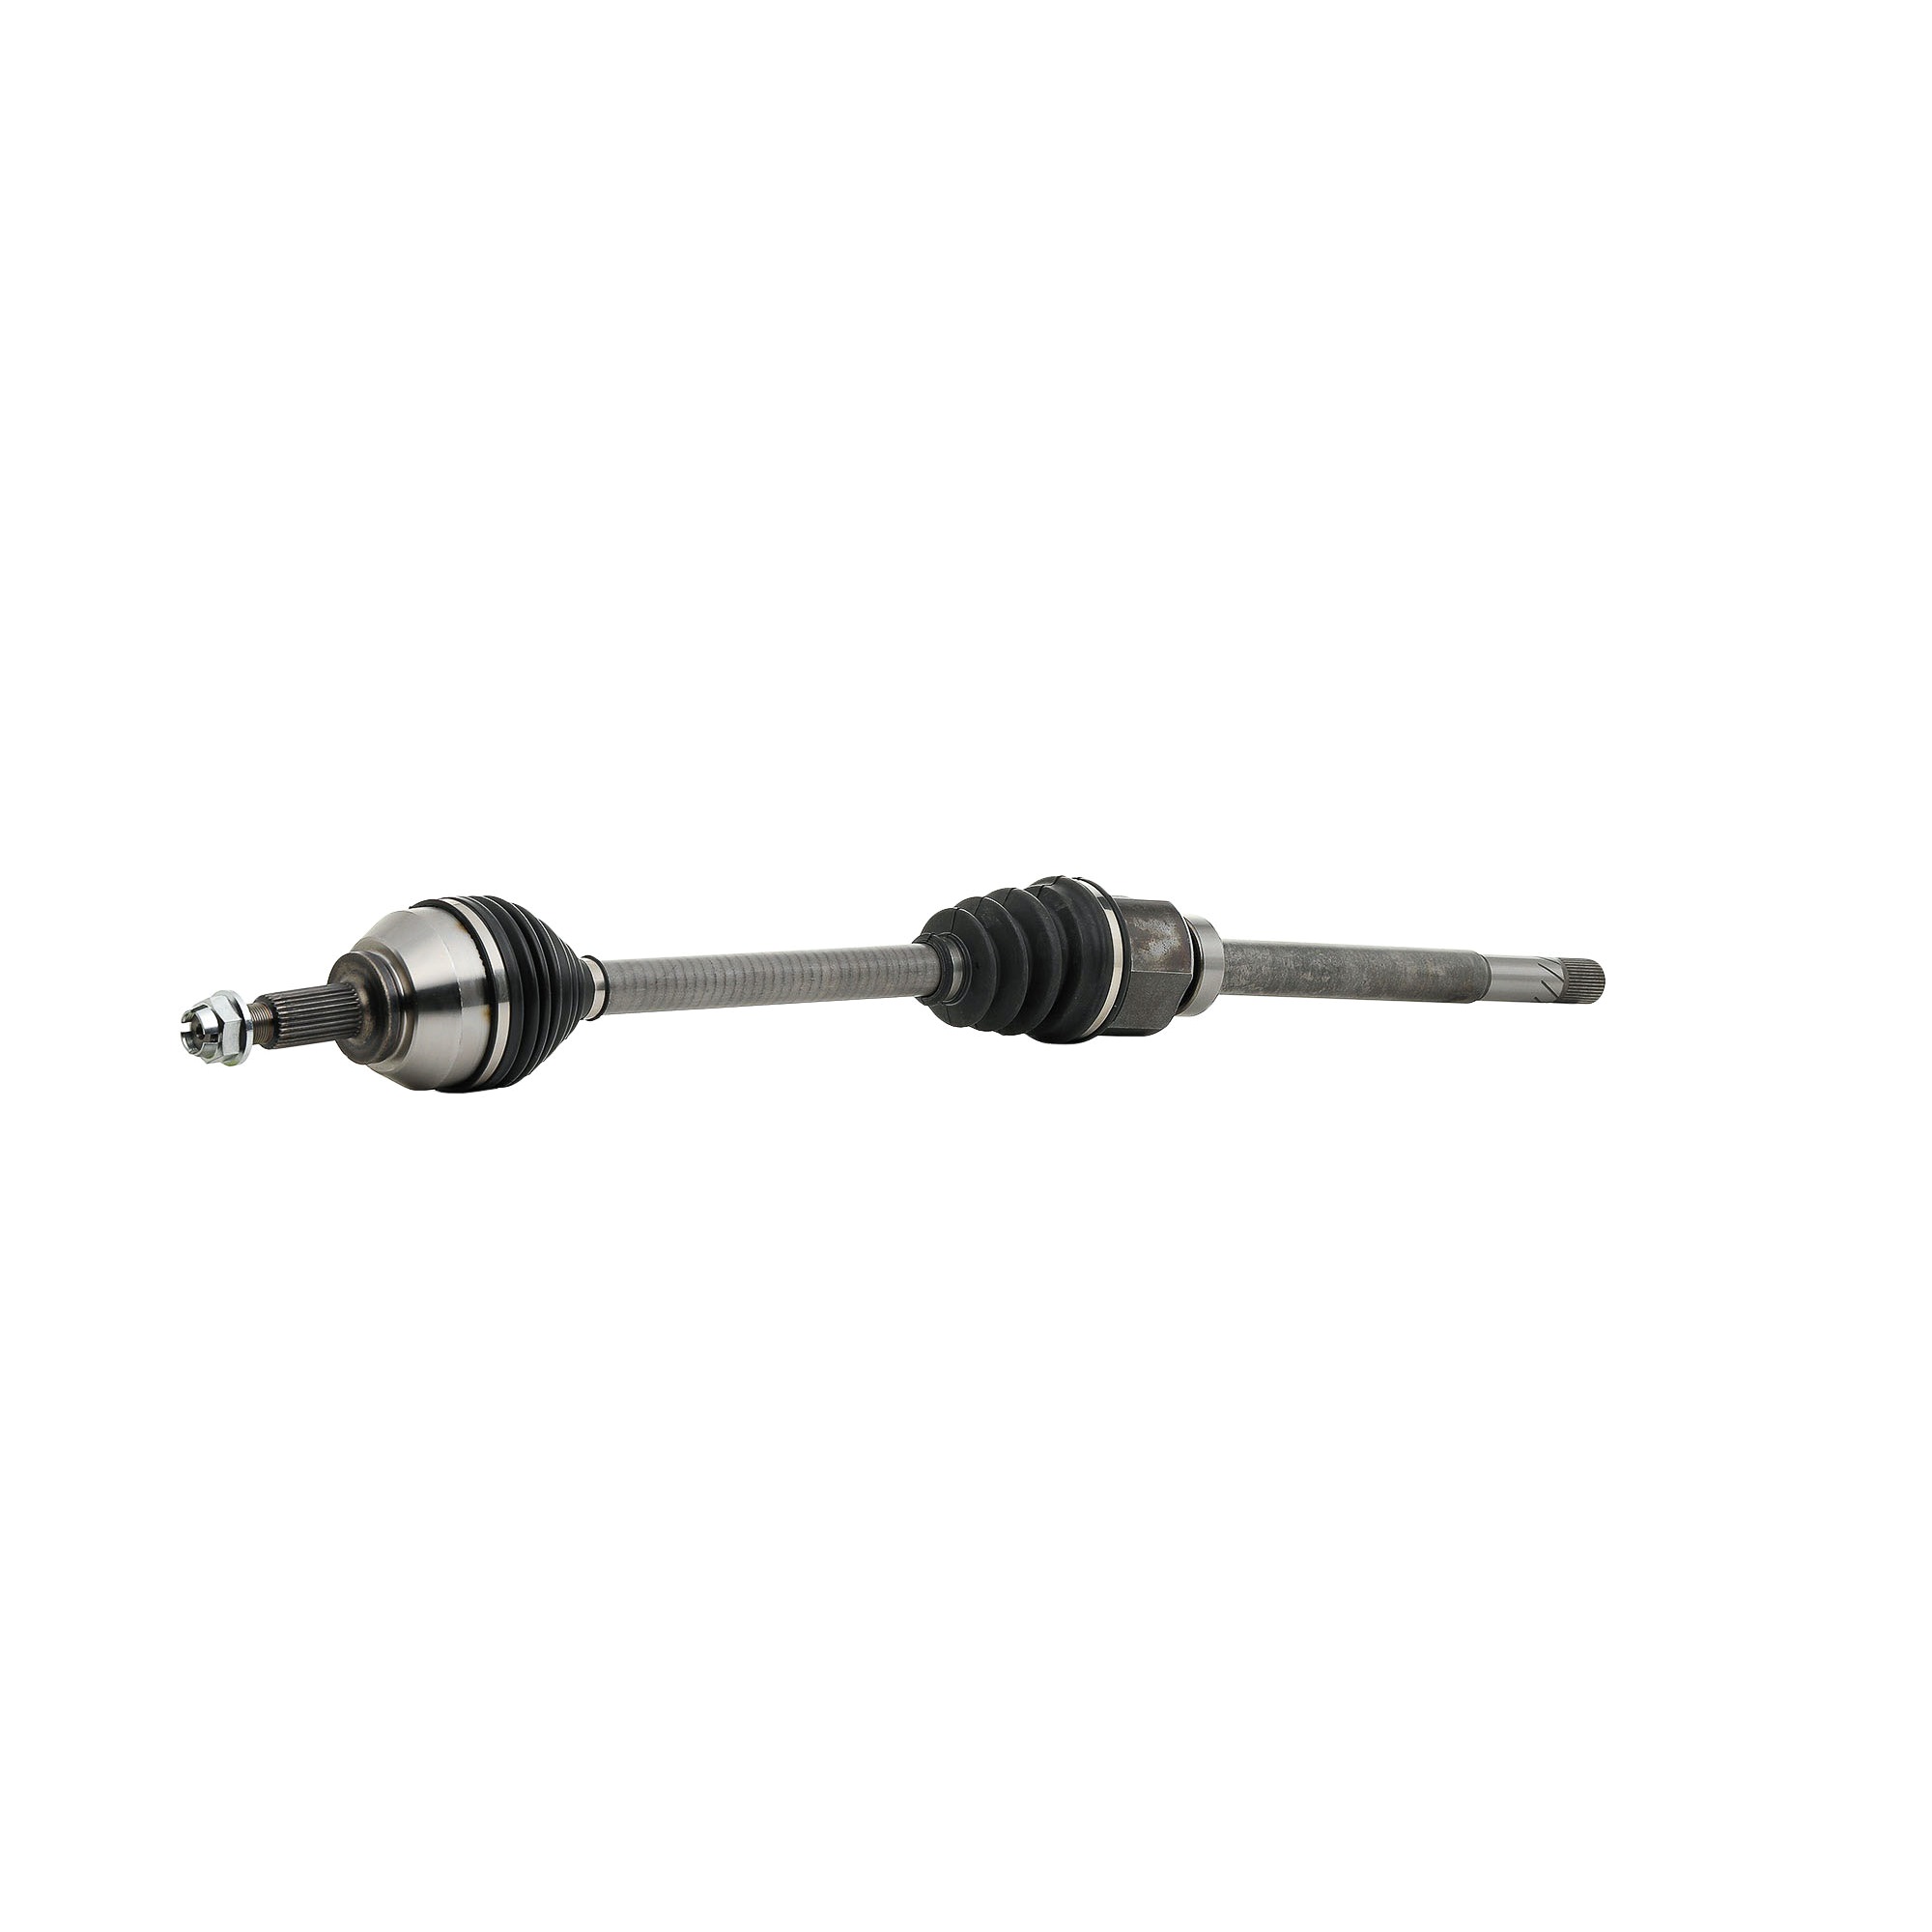 Buy Drive shaft RIDEX 13D0899 - Drive shaft and cv joint parts NISSAN NV300 online